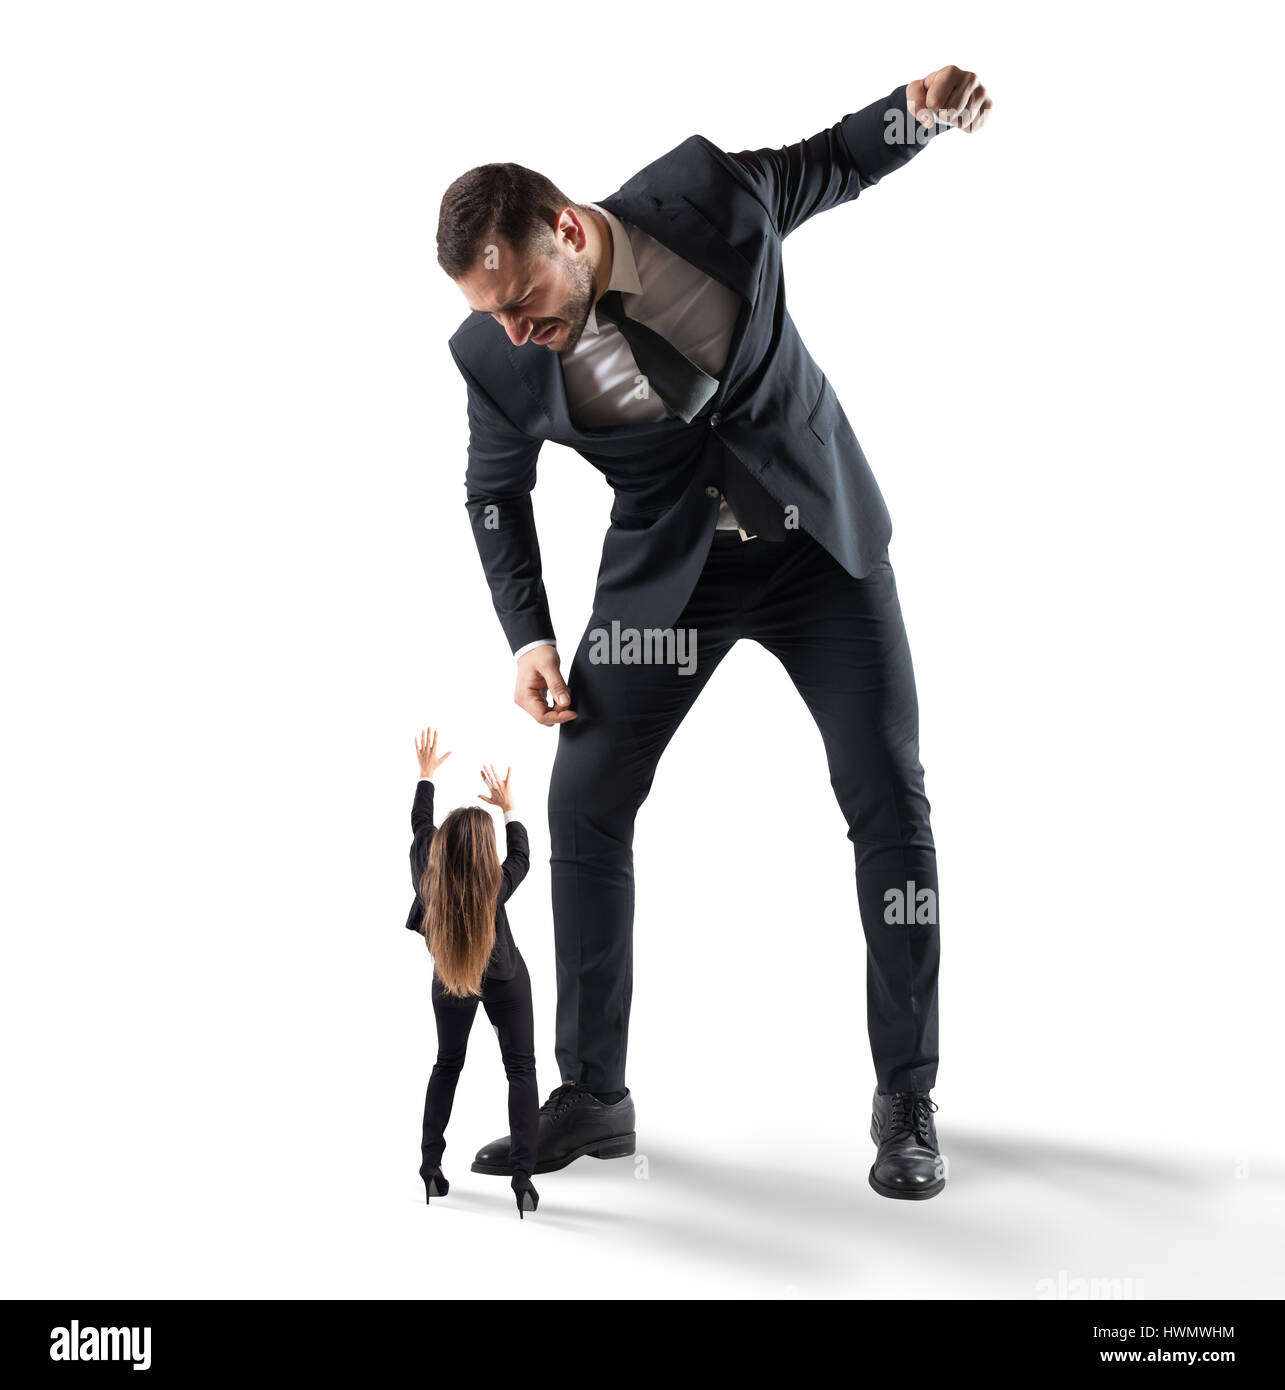 Humiliation and violence at work Stock Photo